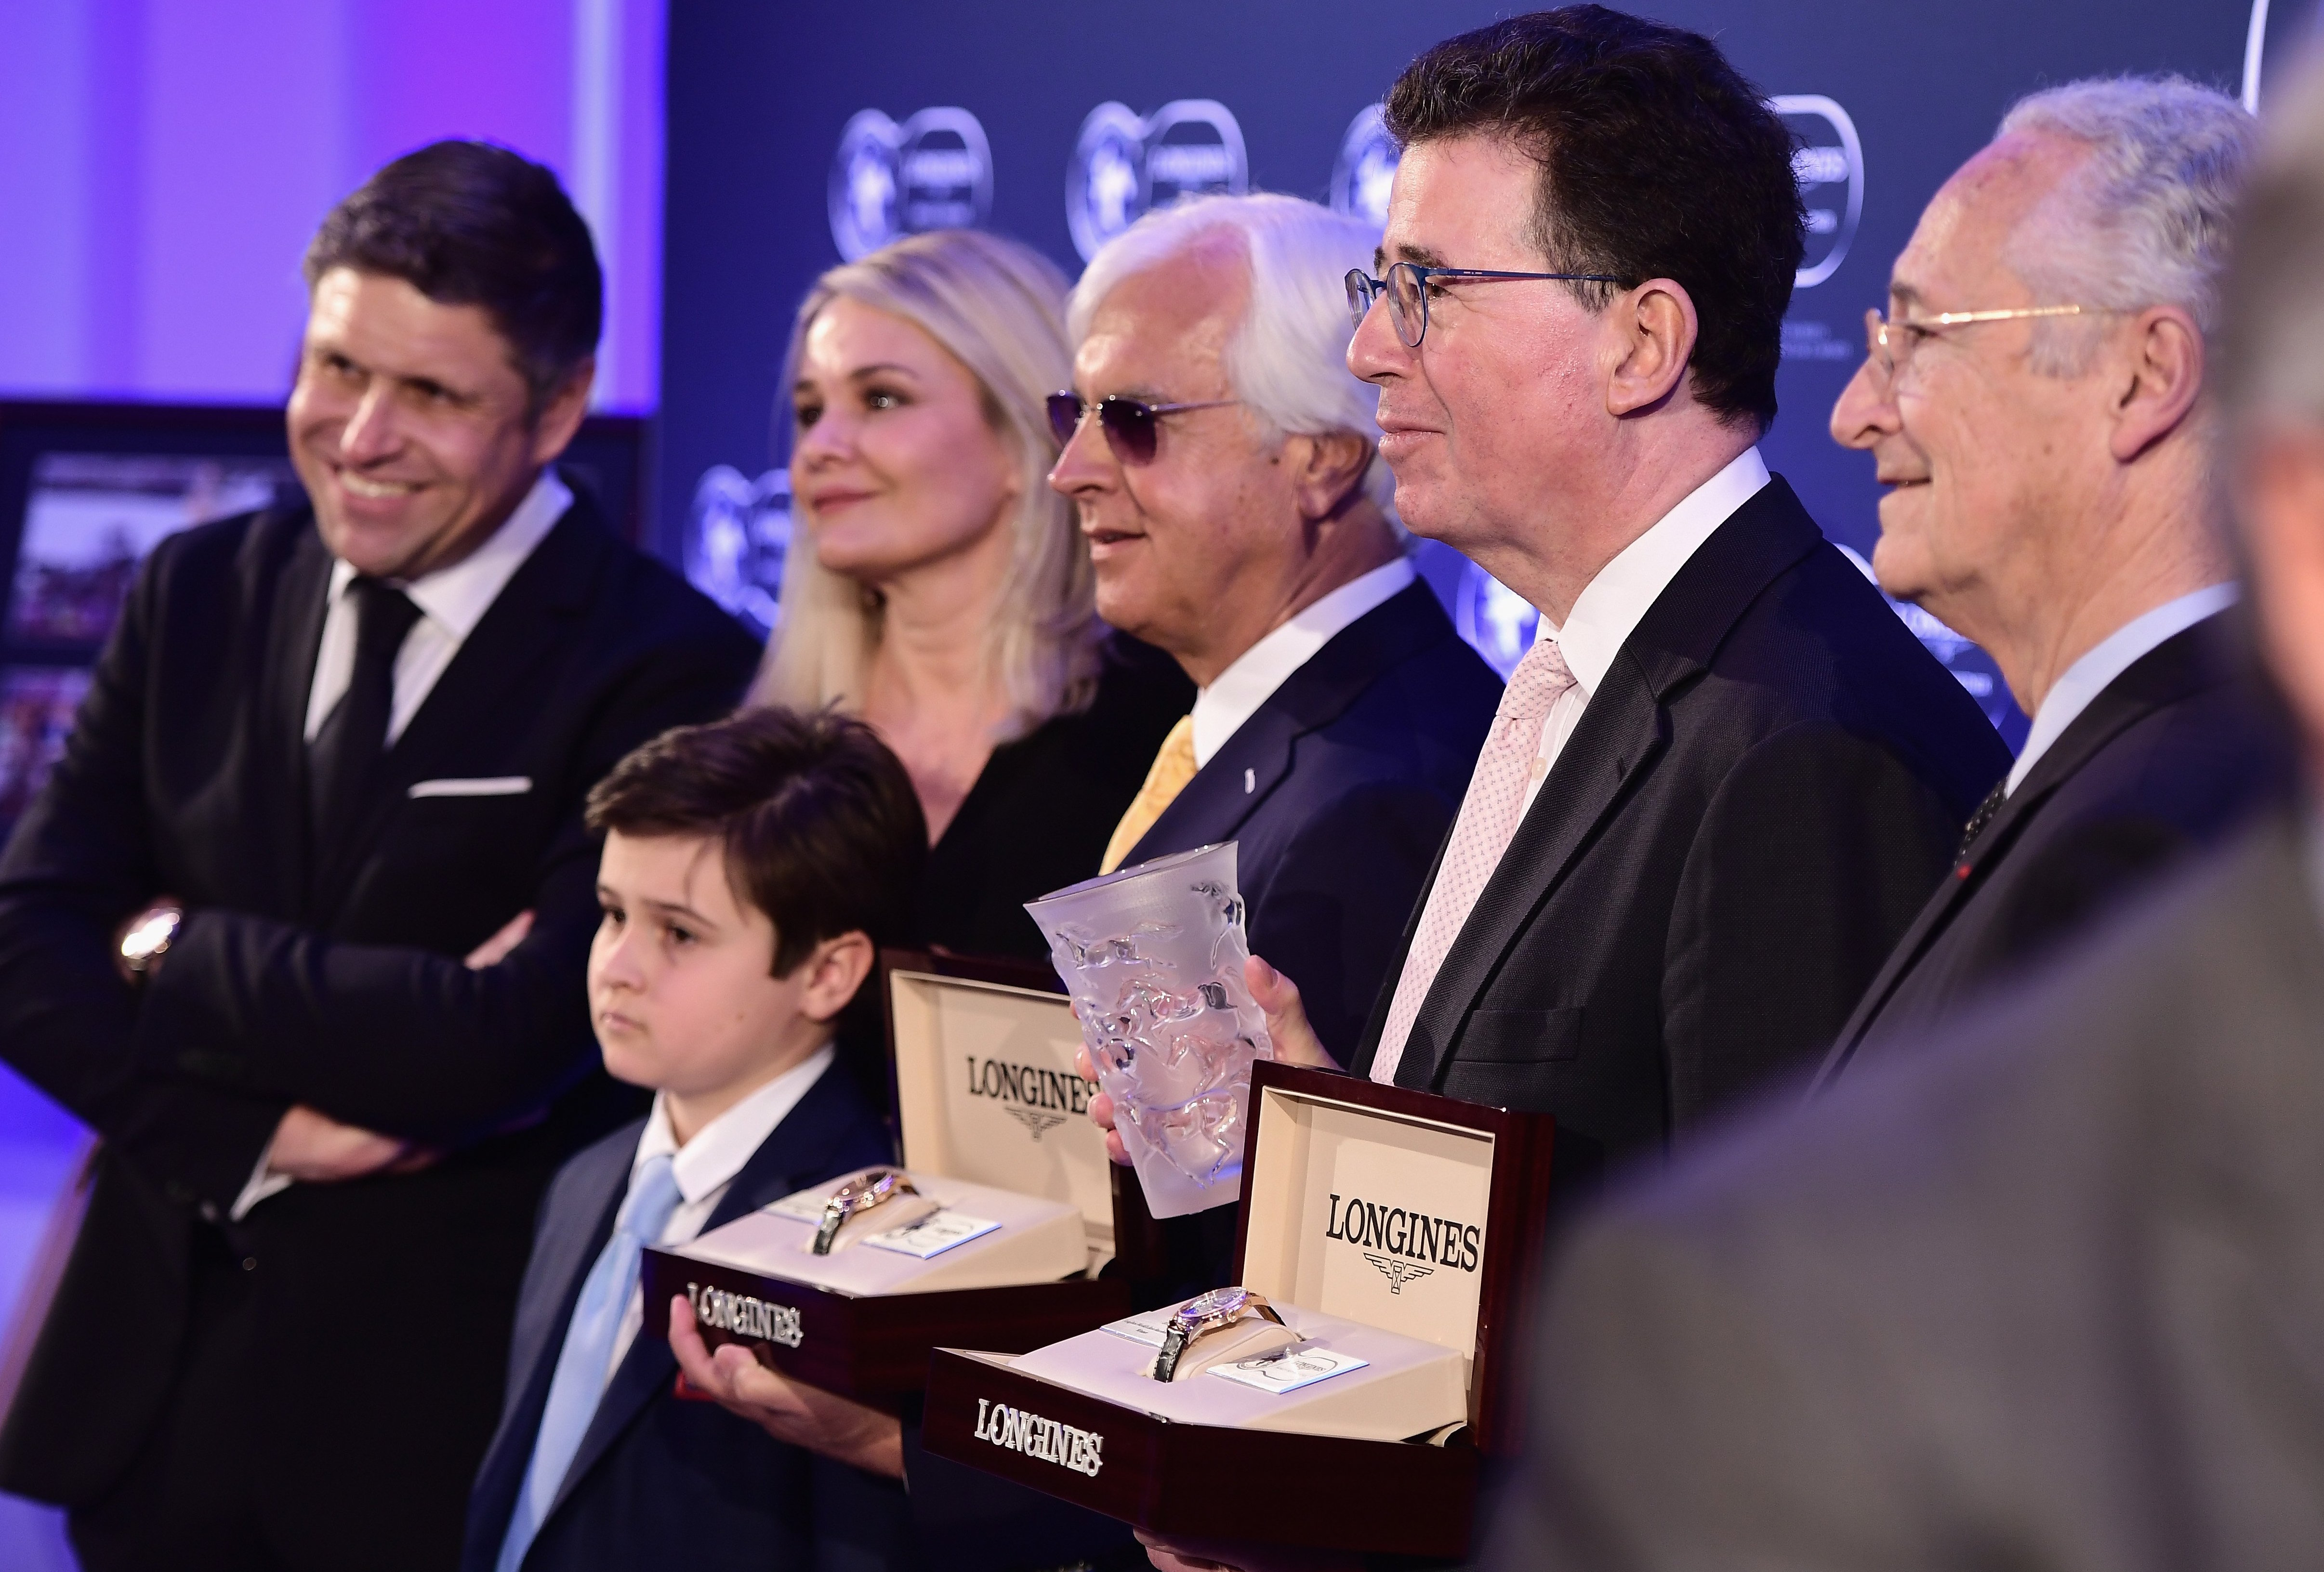 In honour of Arrogate: Juan-Carlos Capelli (left), Vice President of Longines and Head of International Marketing, Bob Baffert (centre) with wife Jill and son Bode, Lord Grimthorpe (second right), Juddmonte’s European racing manager, and IFHA chairman Louis Romanet. Photo: Longines